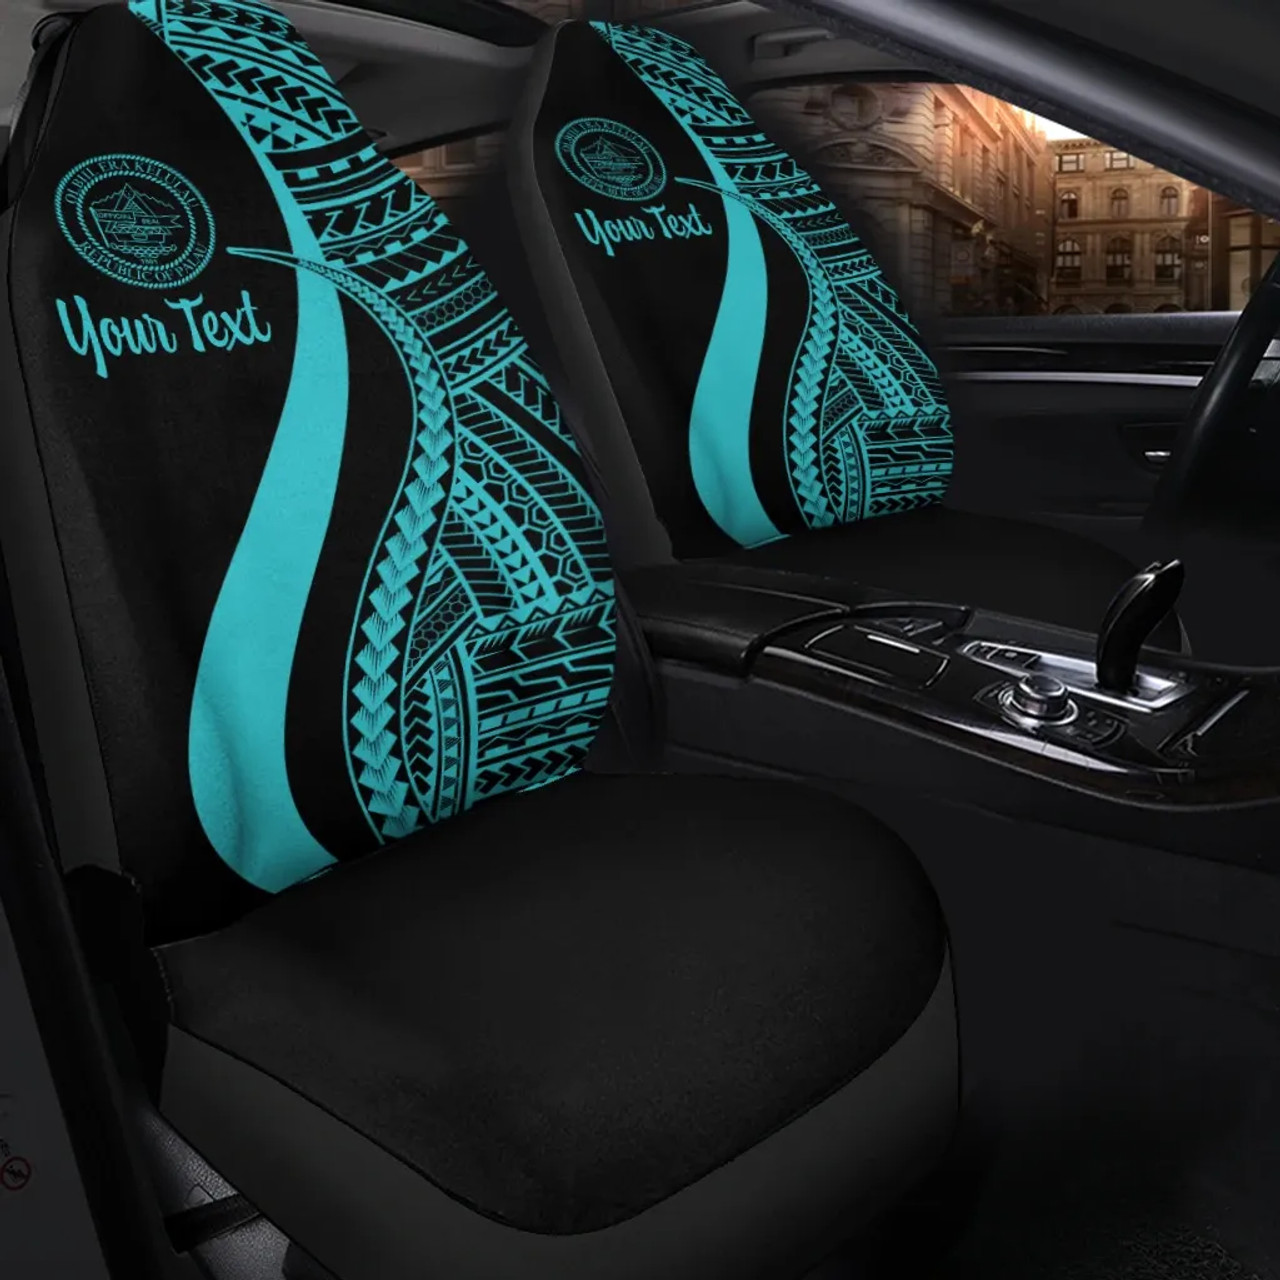 Palau Custom Personalised Car Seat Covers - Turquoise Polynesian Tentacle Tribal Pattern Crest